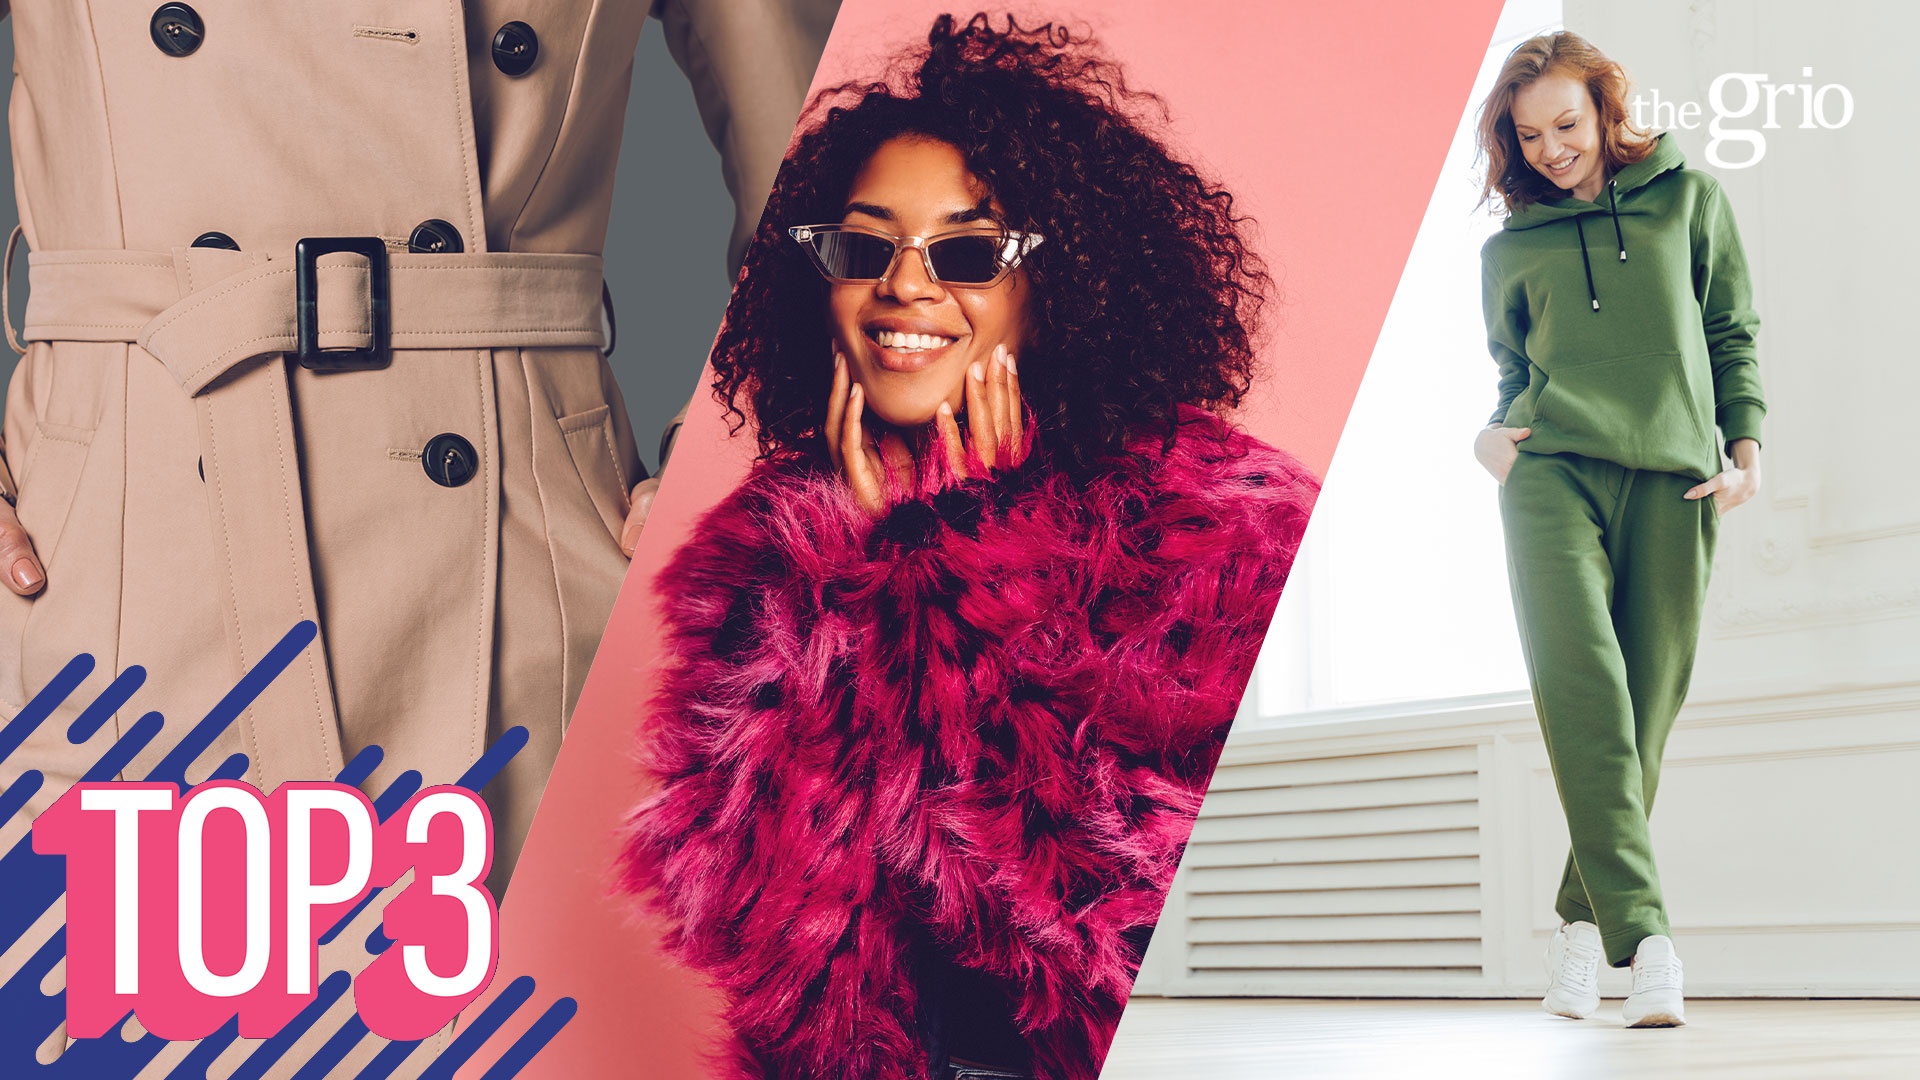 Watch: theGrio Top 3| What are the top winter fashion essentials for women?